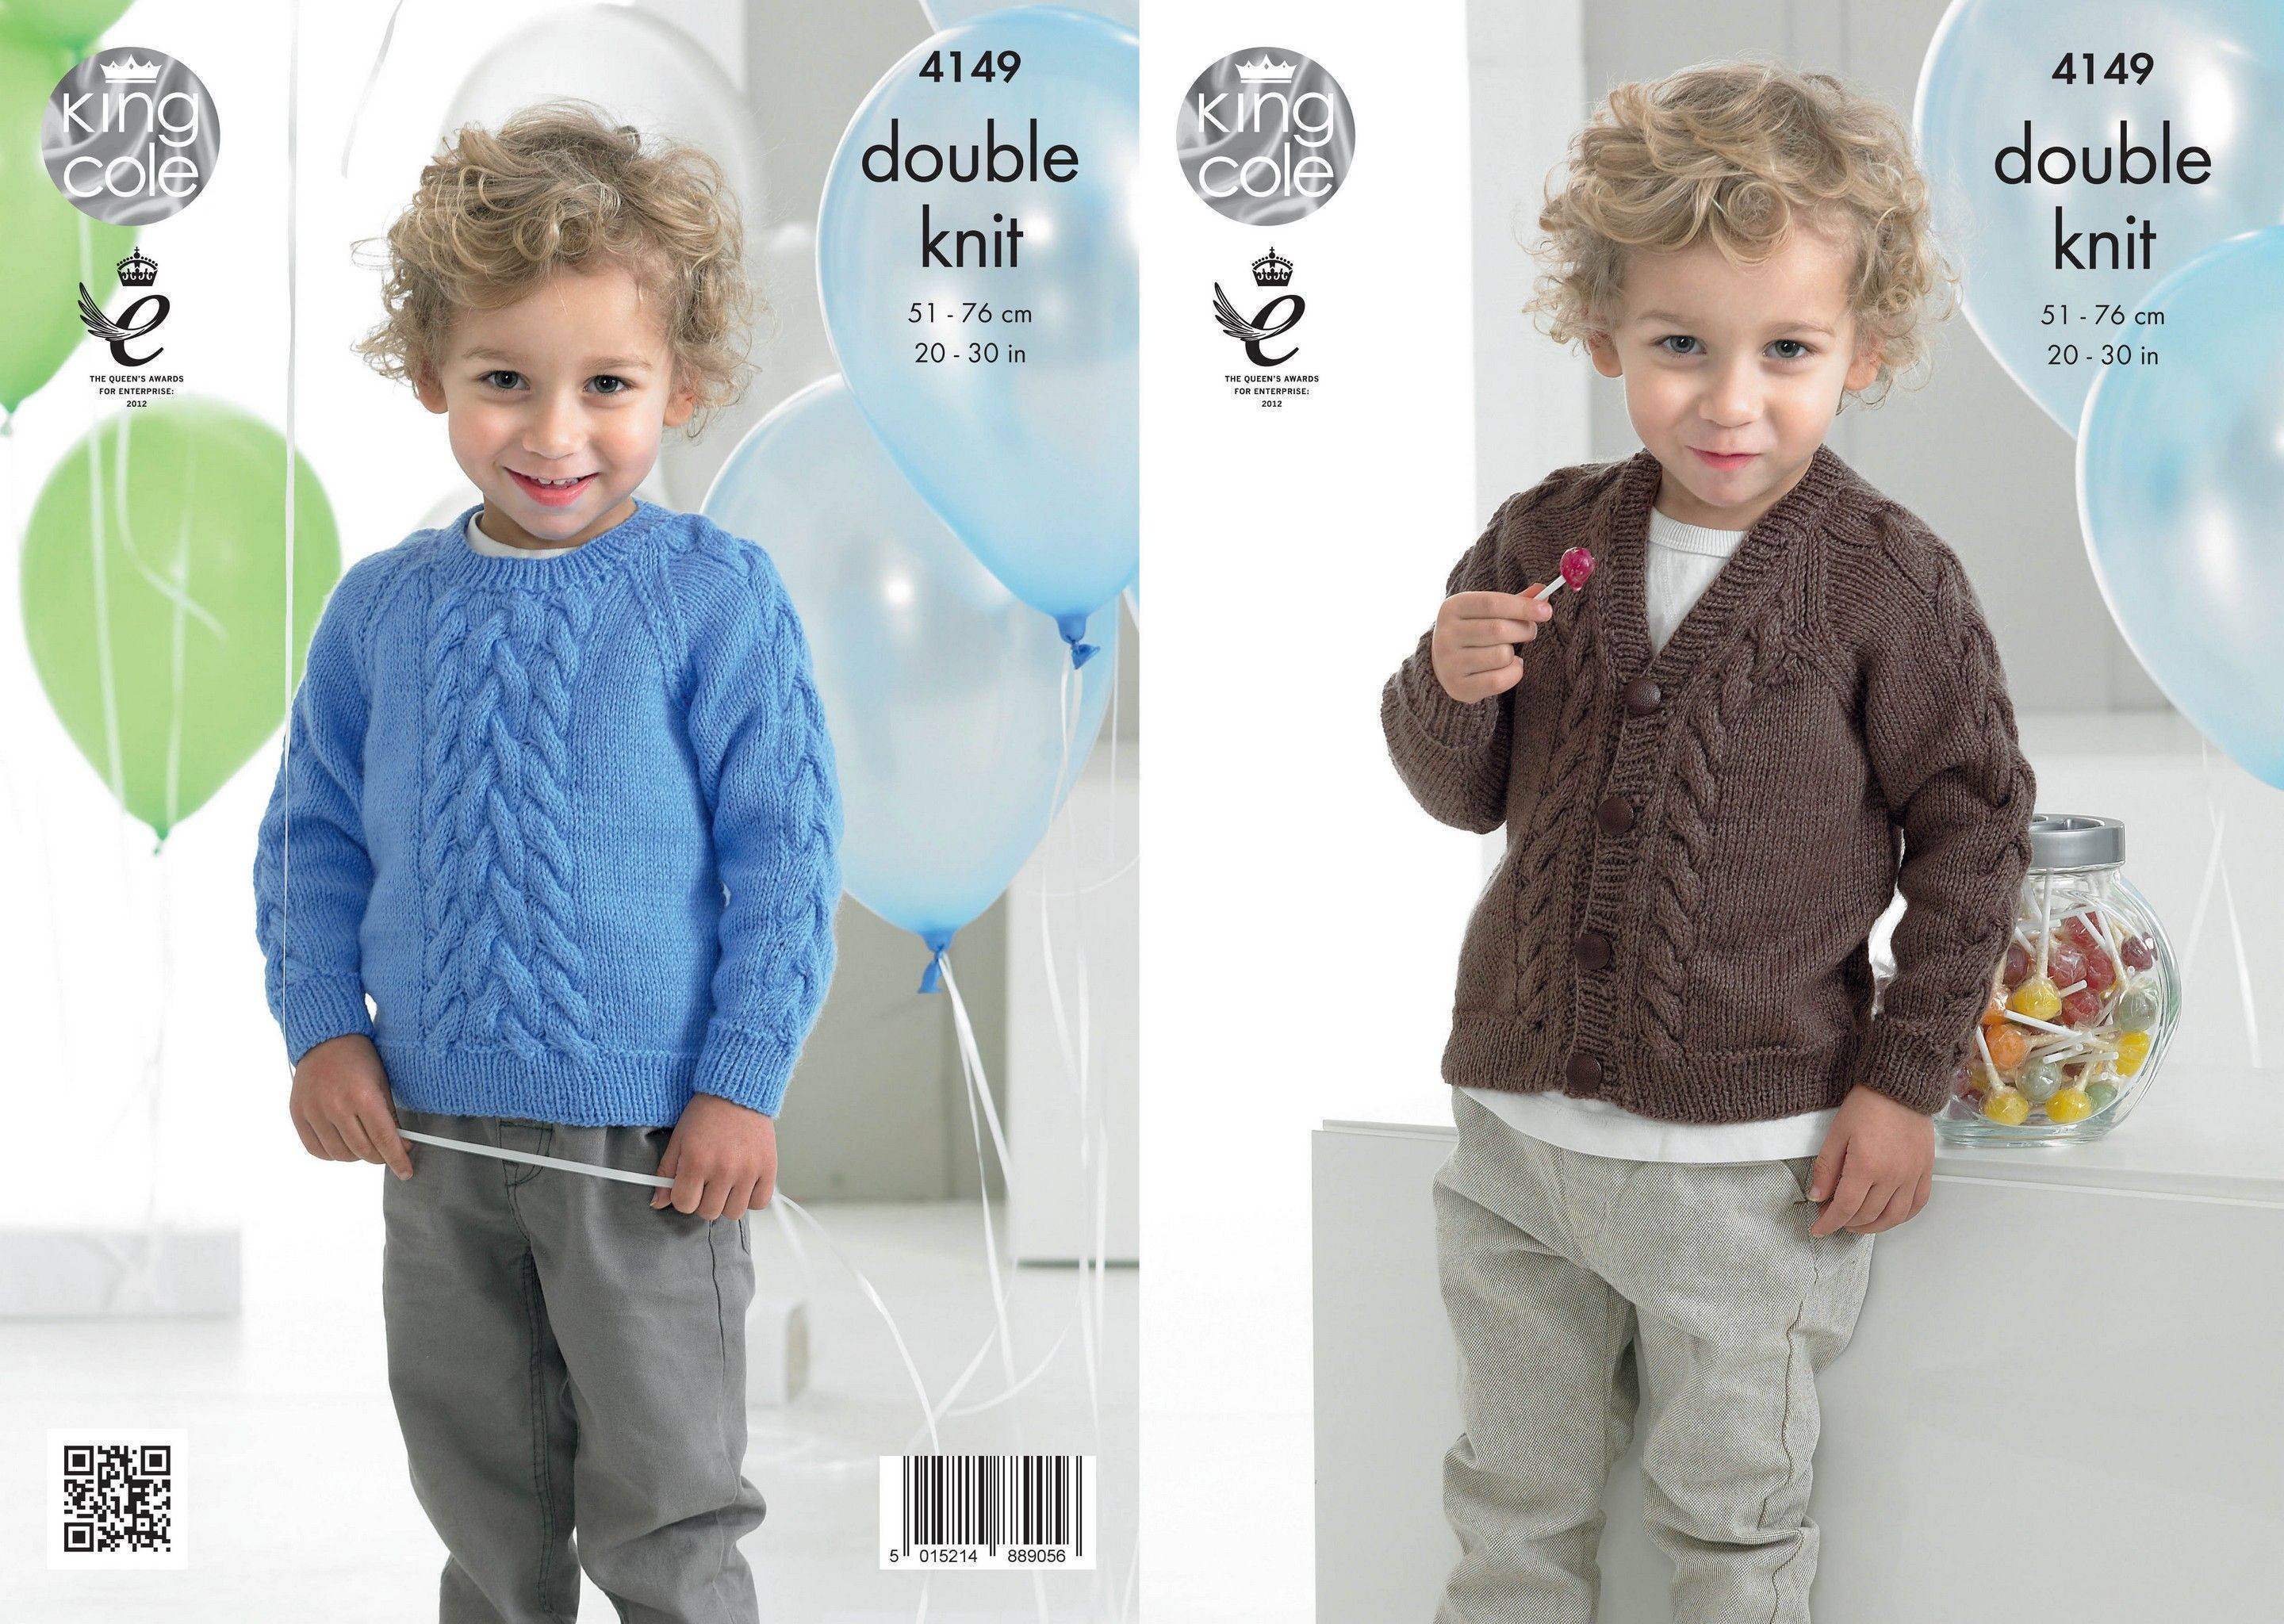 Sweater and Cardigan in King Cole Comfort Baby DK (4149) | The Knitting ...